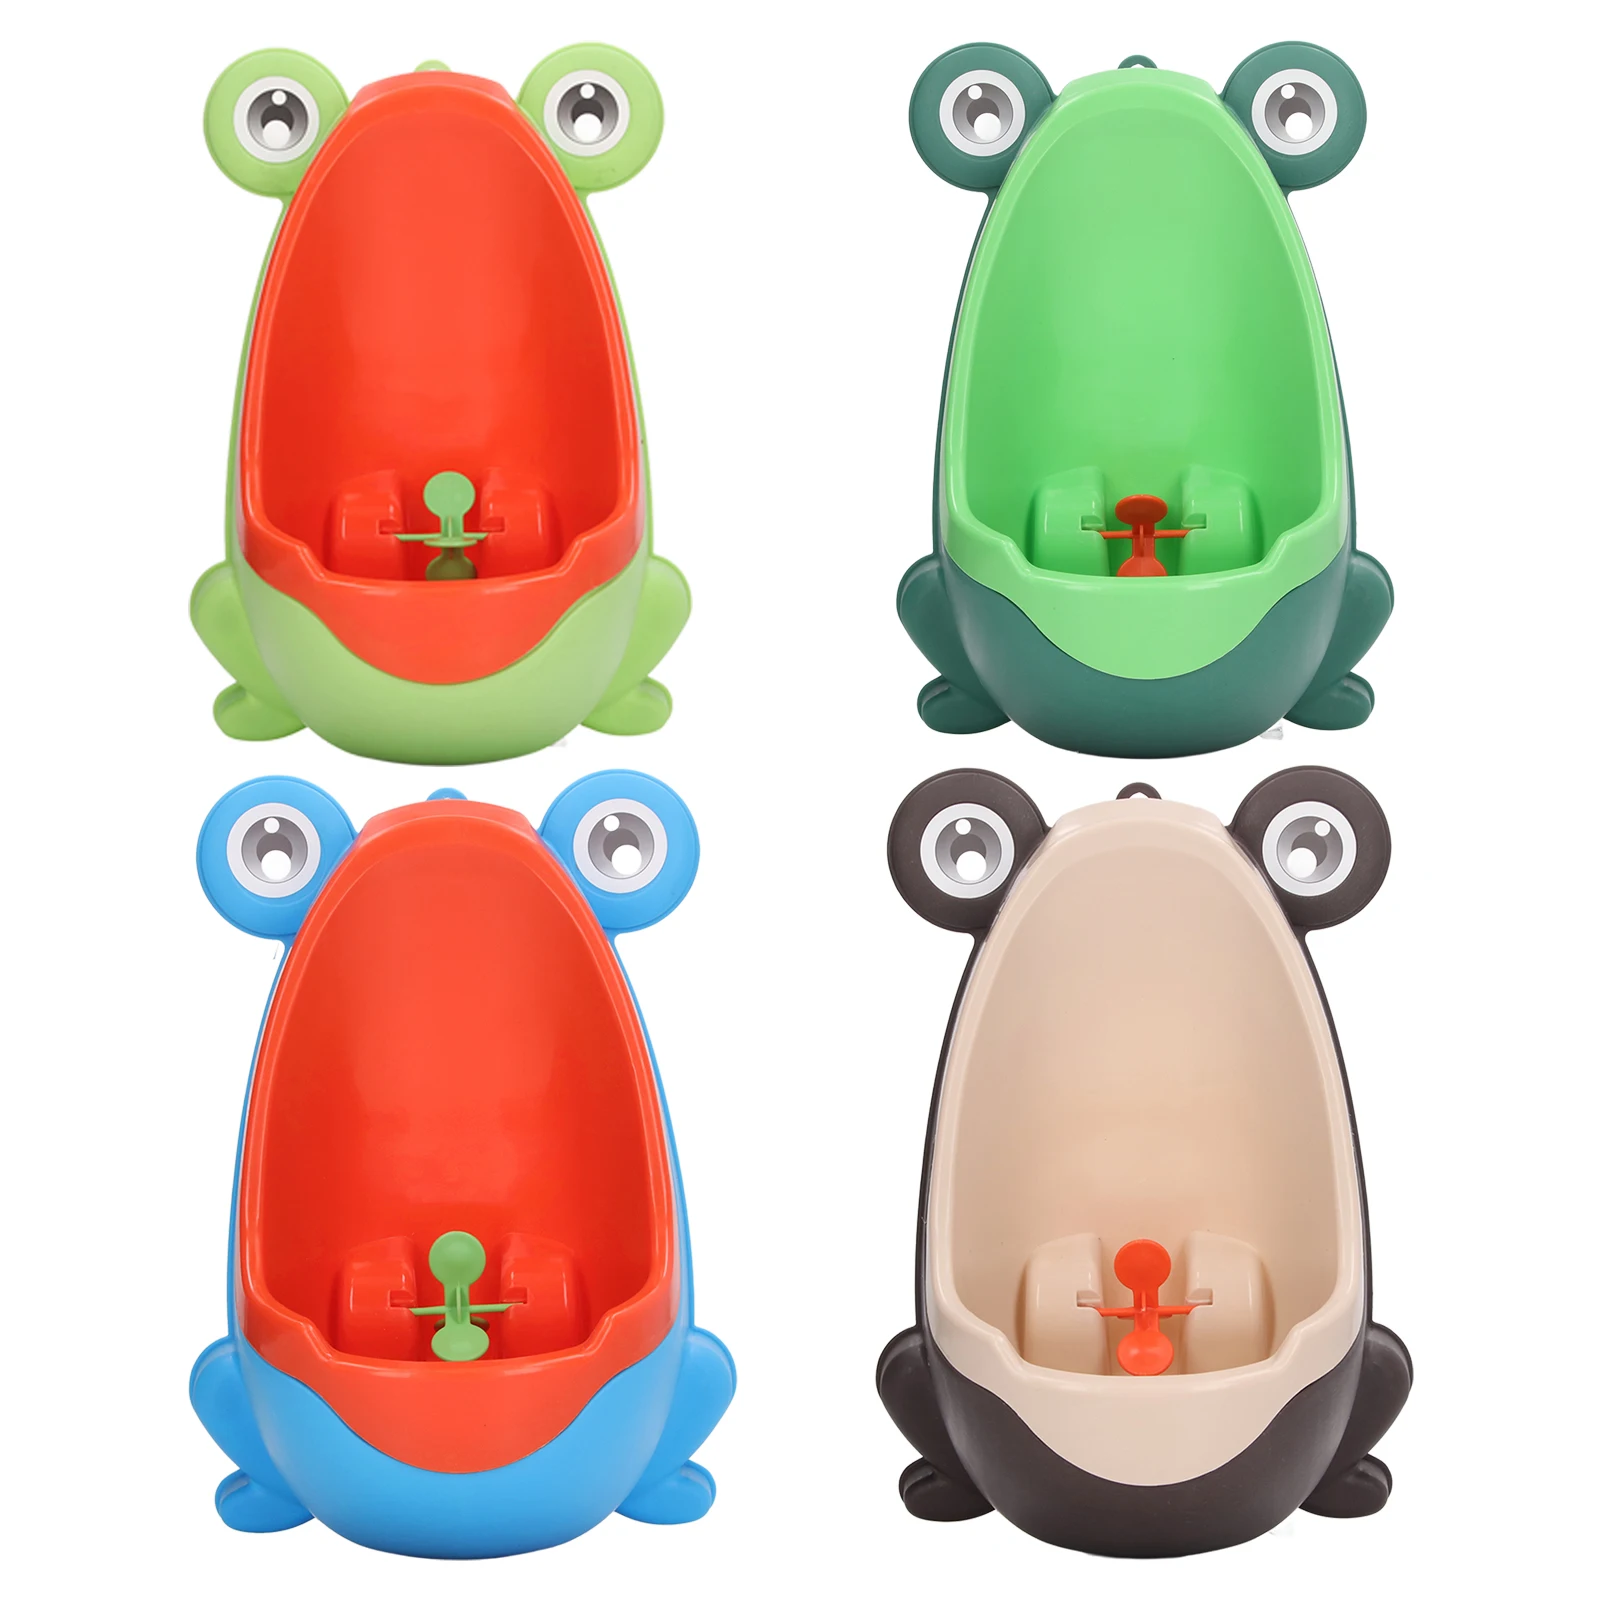 Baby Boys Standing Potty Shape Wall-Mounted Urinals Toilet Training Children Stand Vertical Urinal Potty 2021 new portable baby potty multifunction baby toilet children s pot baby boy training potty kids portable chair toilet seat wc